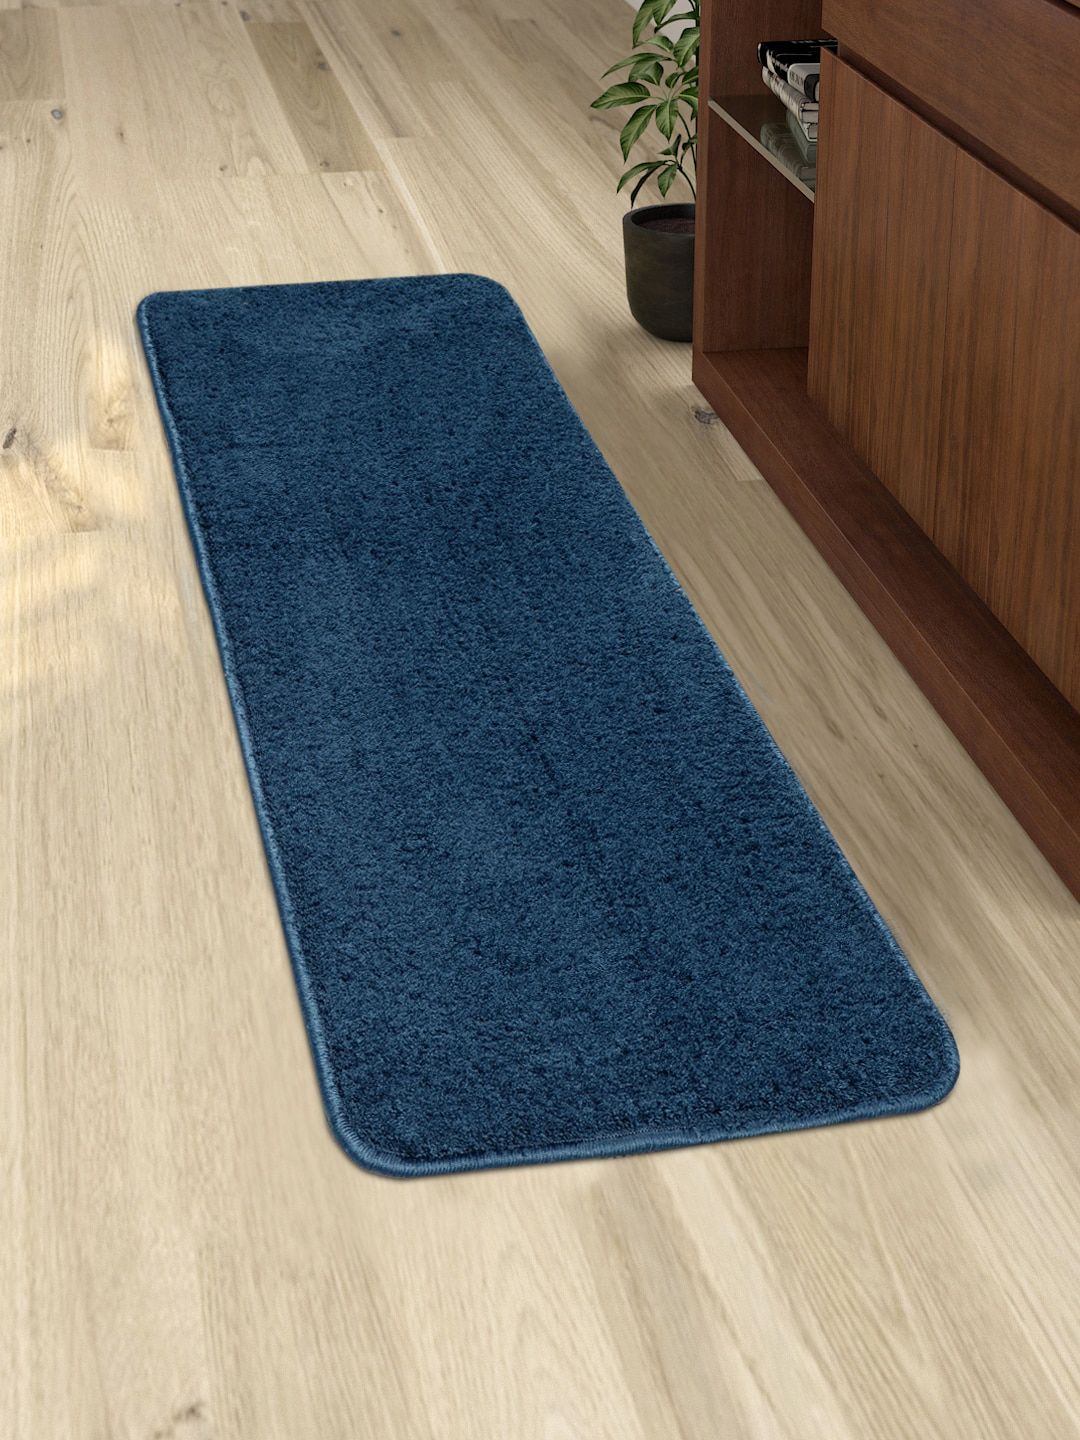 Saral Home Blue Solid Neon Shaggy Anti-Skid Floor Runner Price in India